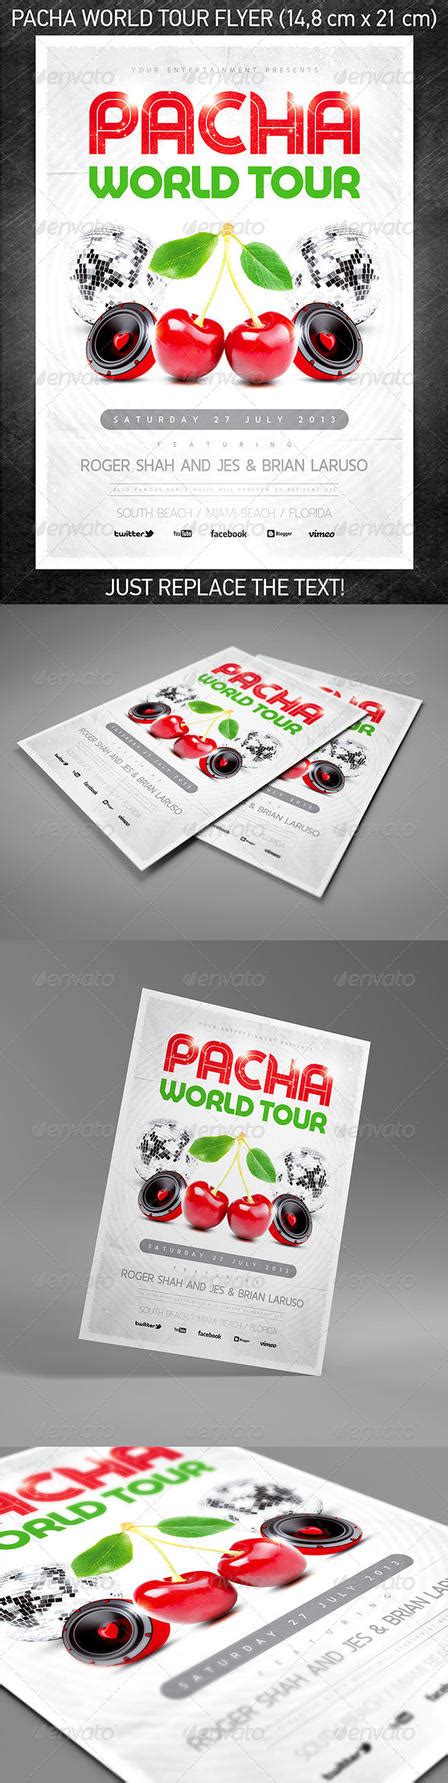 Pacha World Tour Party Flyer, PSD Template by 4ustudio on DeviantArt